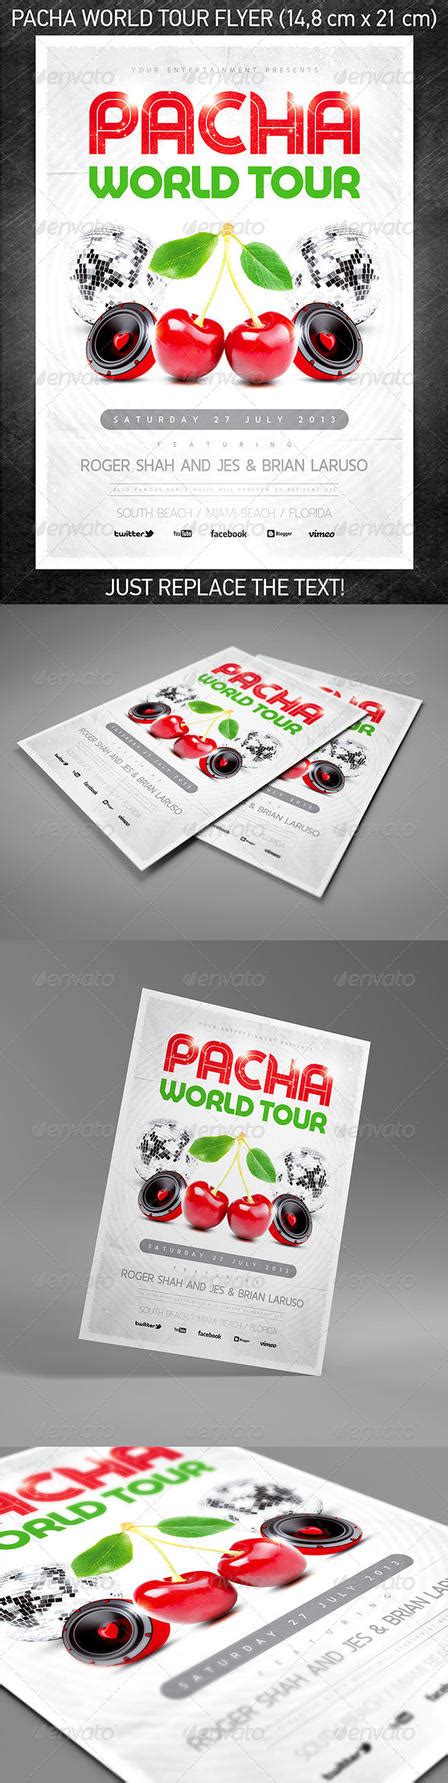 Pacha World Tour Party Flyer, PSD Template by 4ustudio on DeviantArt